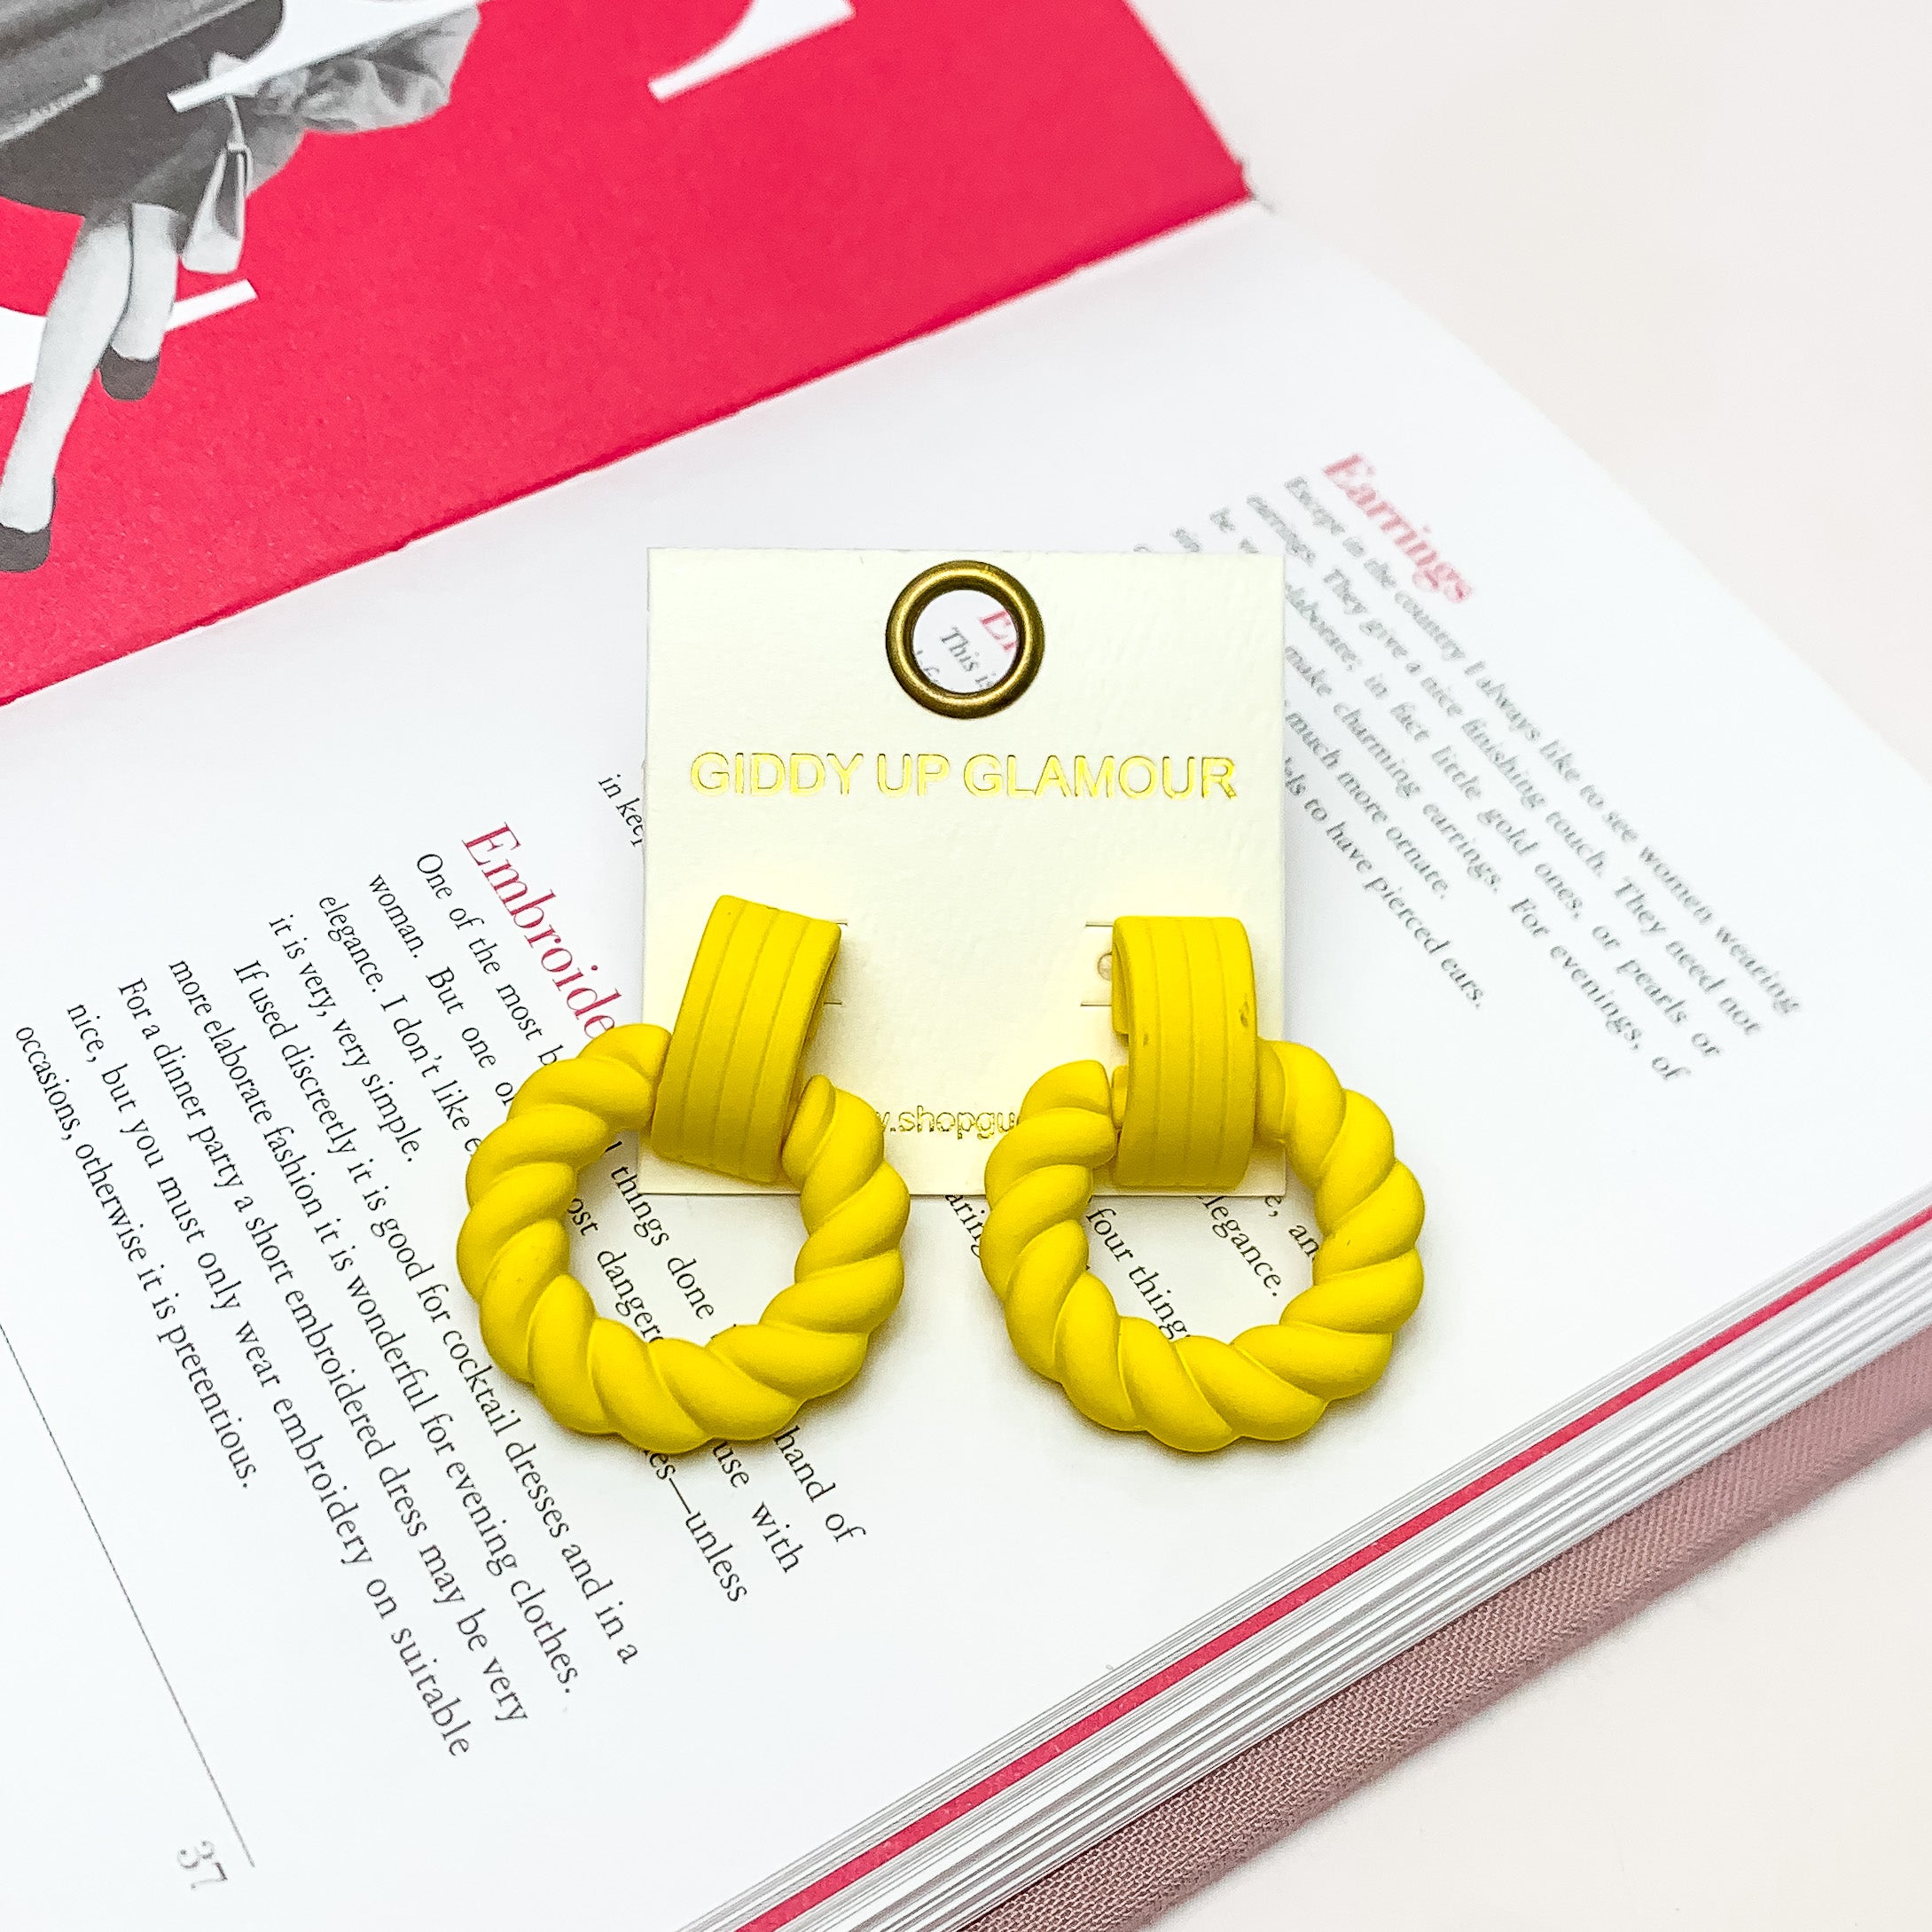 Made to Party Twisted Circle Earrings in Yellow. Pictured on an open page of a book.